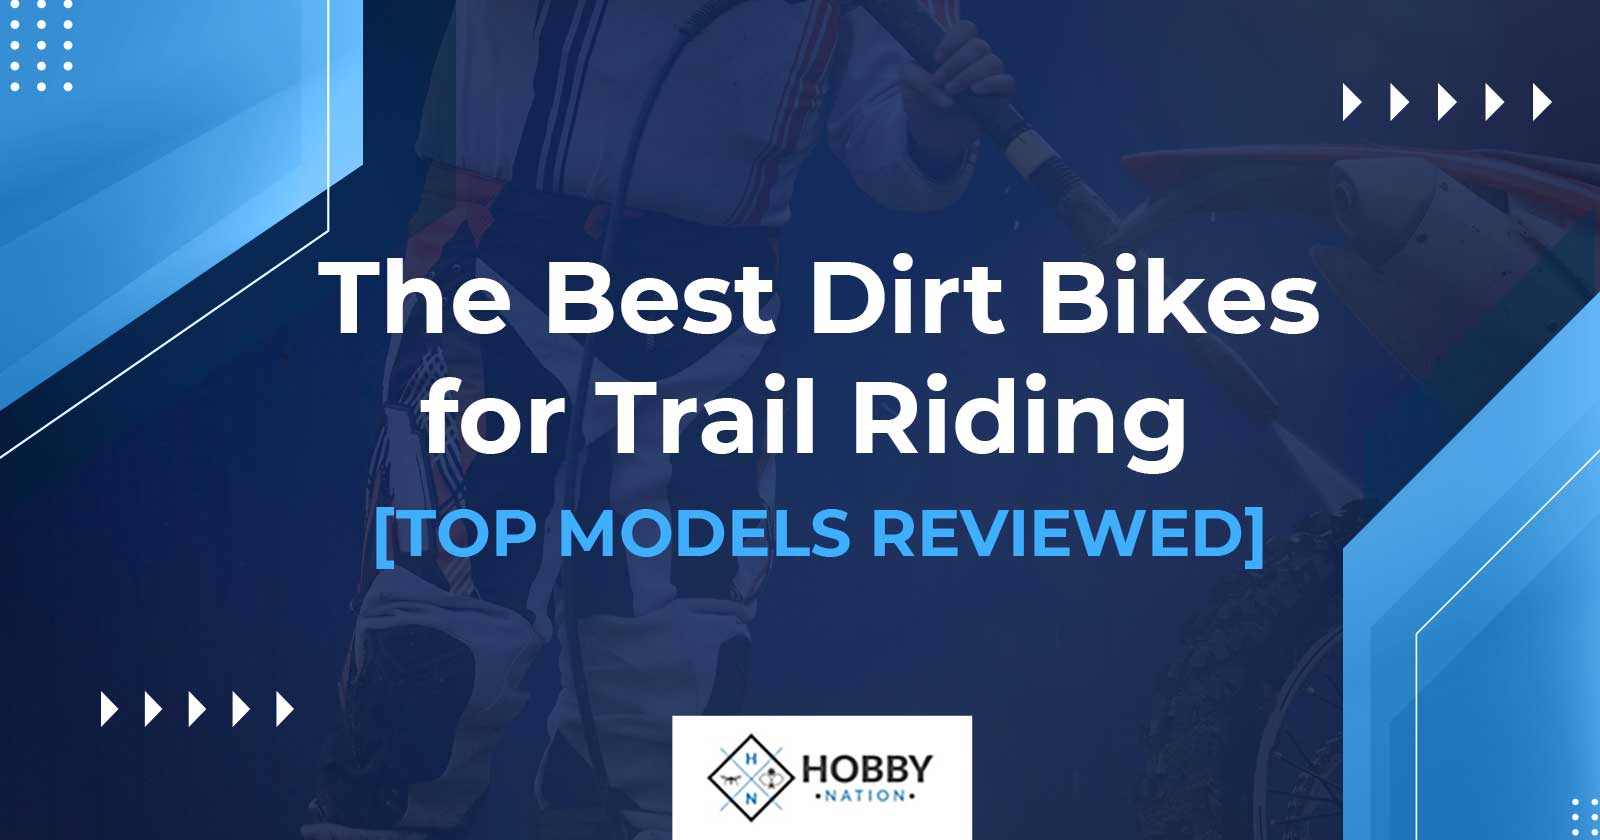 The Best Dirt Bikes for Trail Riding [TOP MODELS REVIEWED]